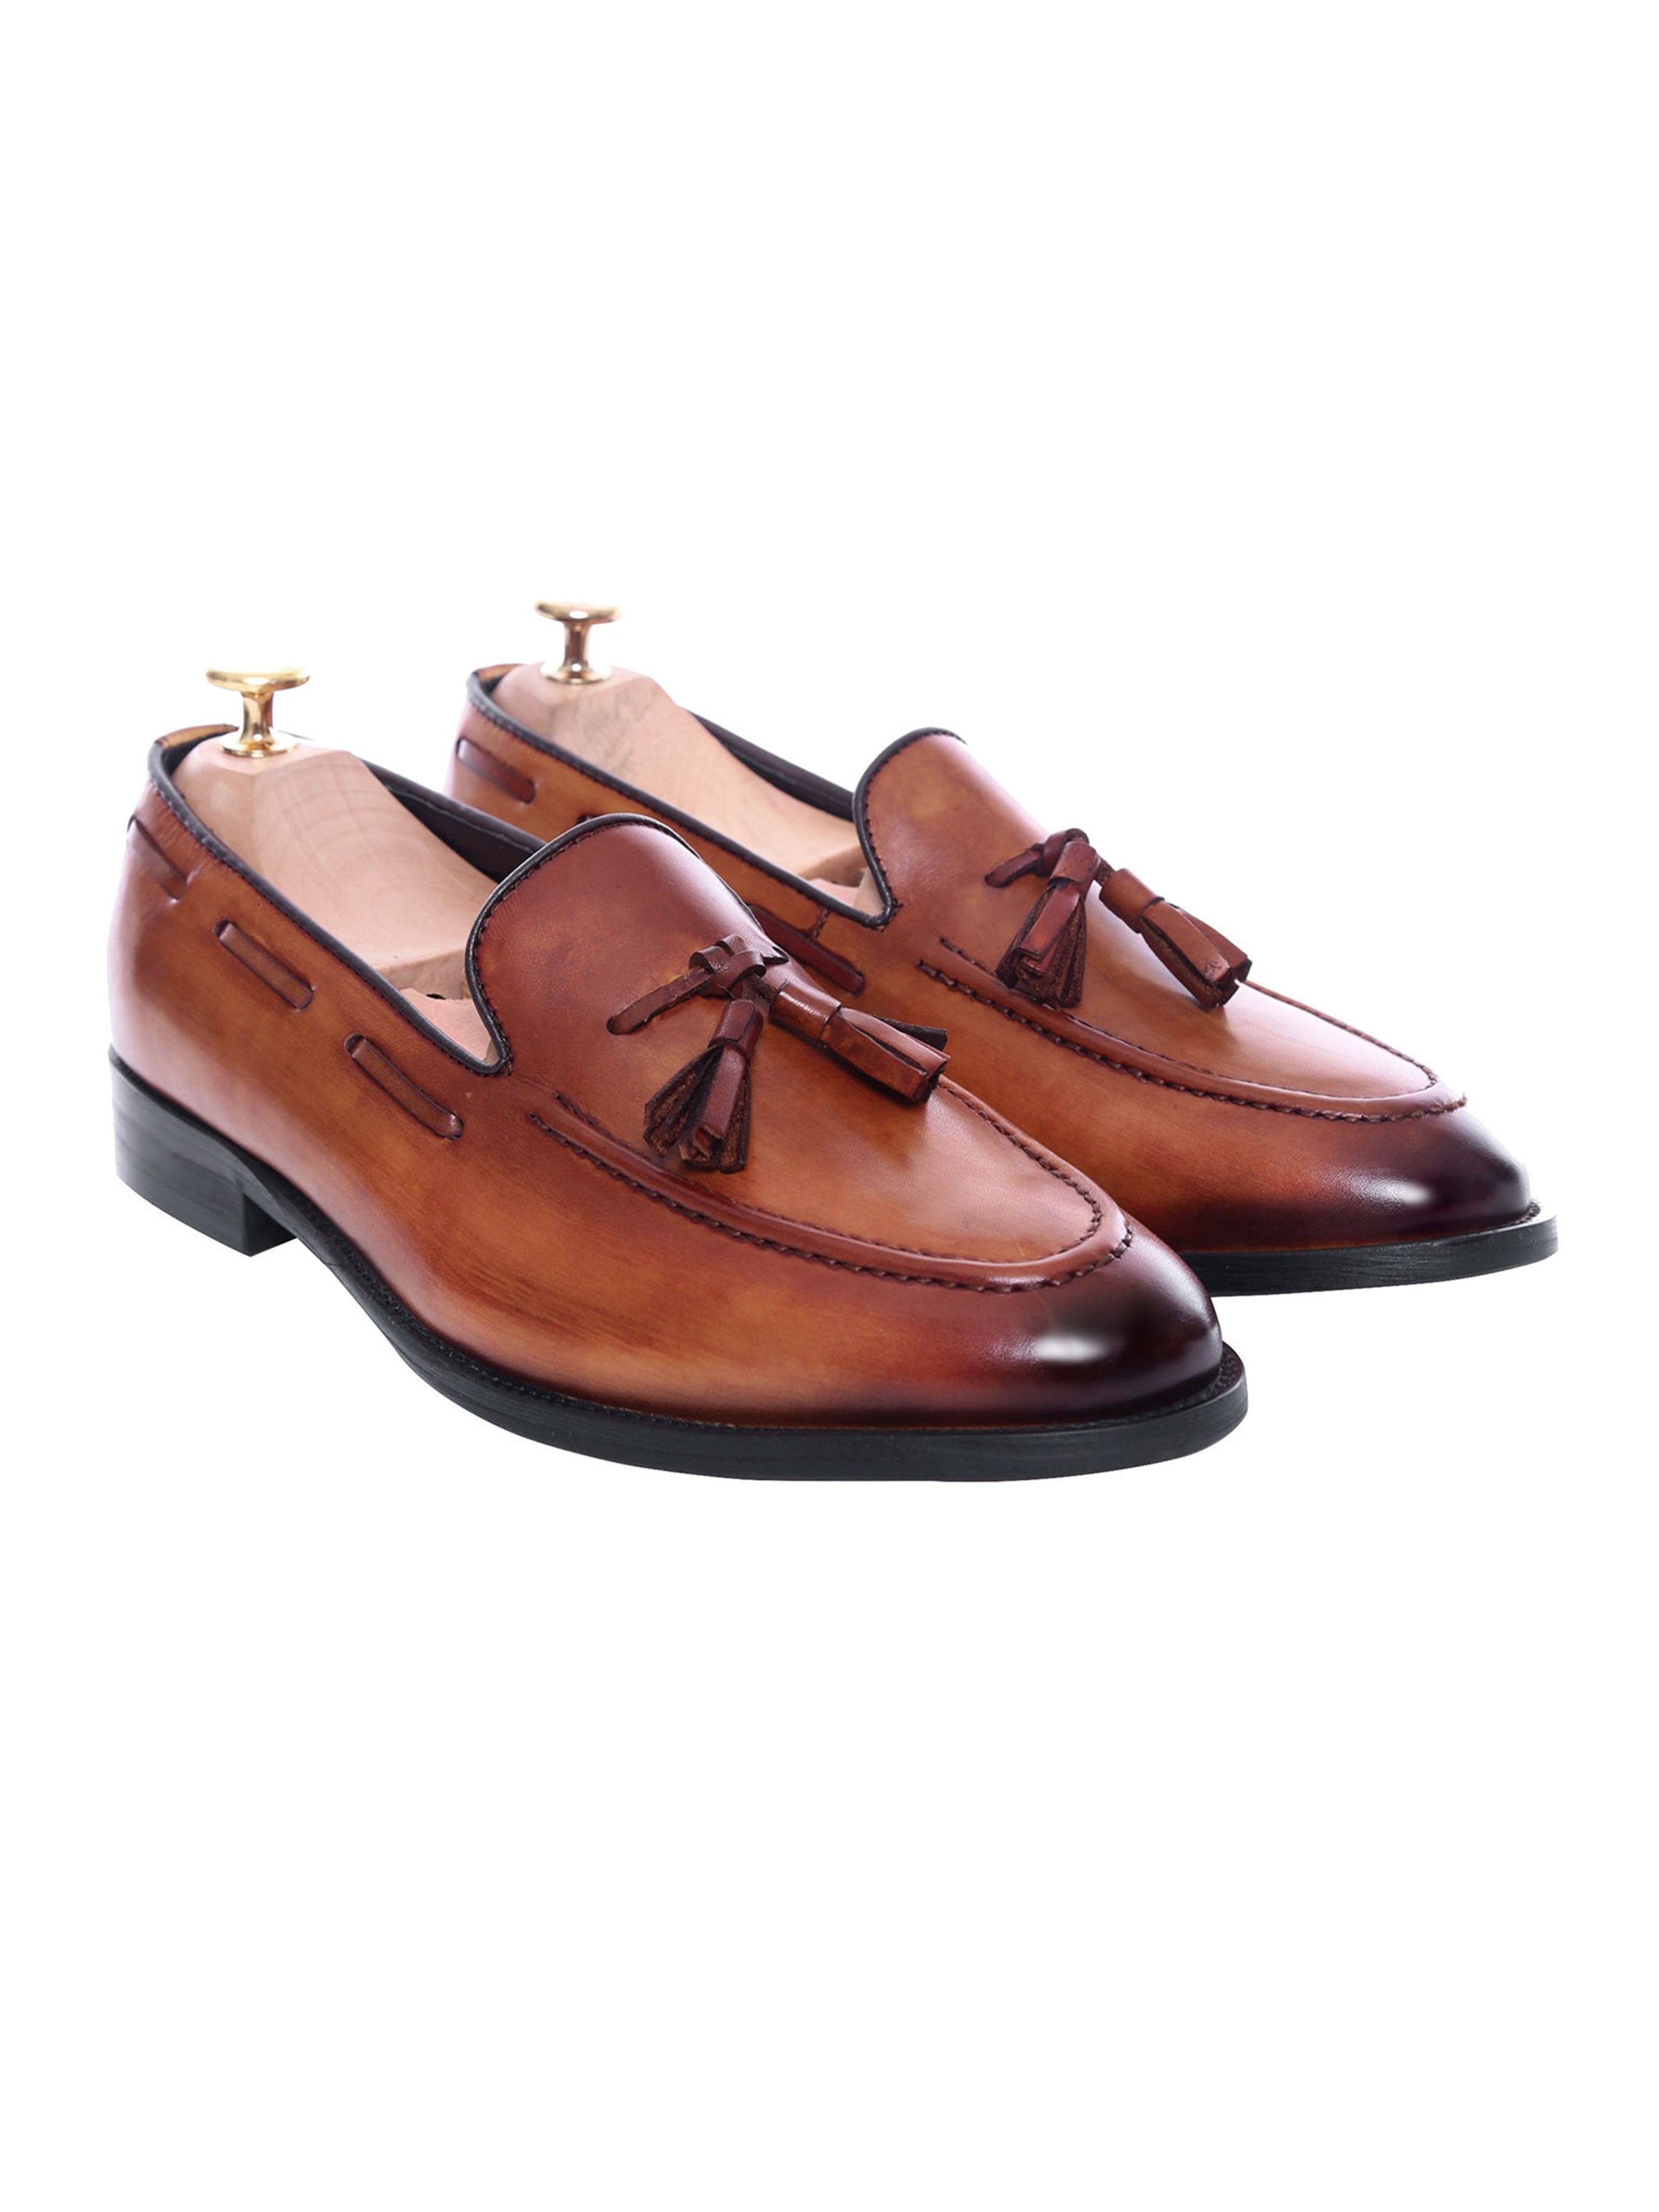 Tassel Loafer - Cognac Tan (Hand Painted Patina) - Zeve Shoes